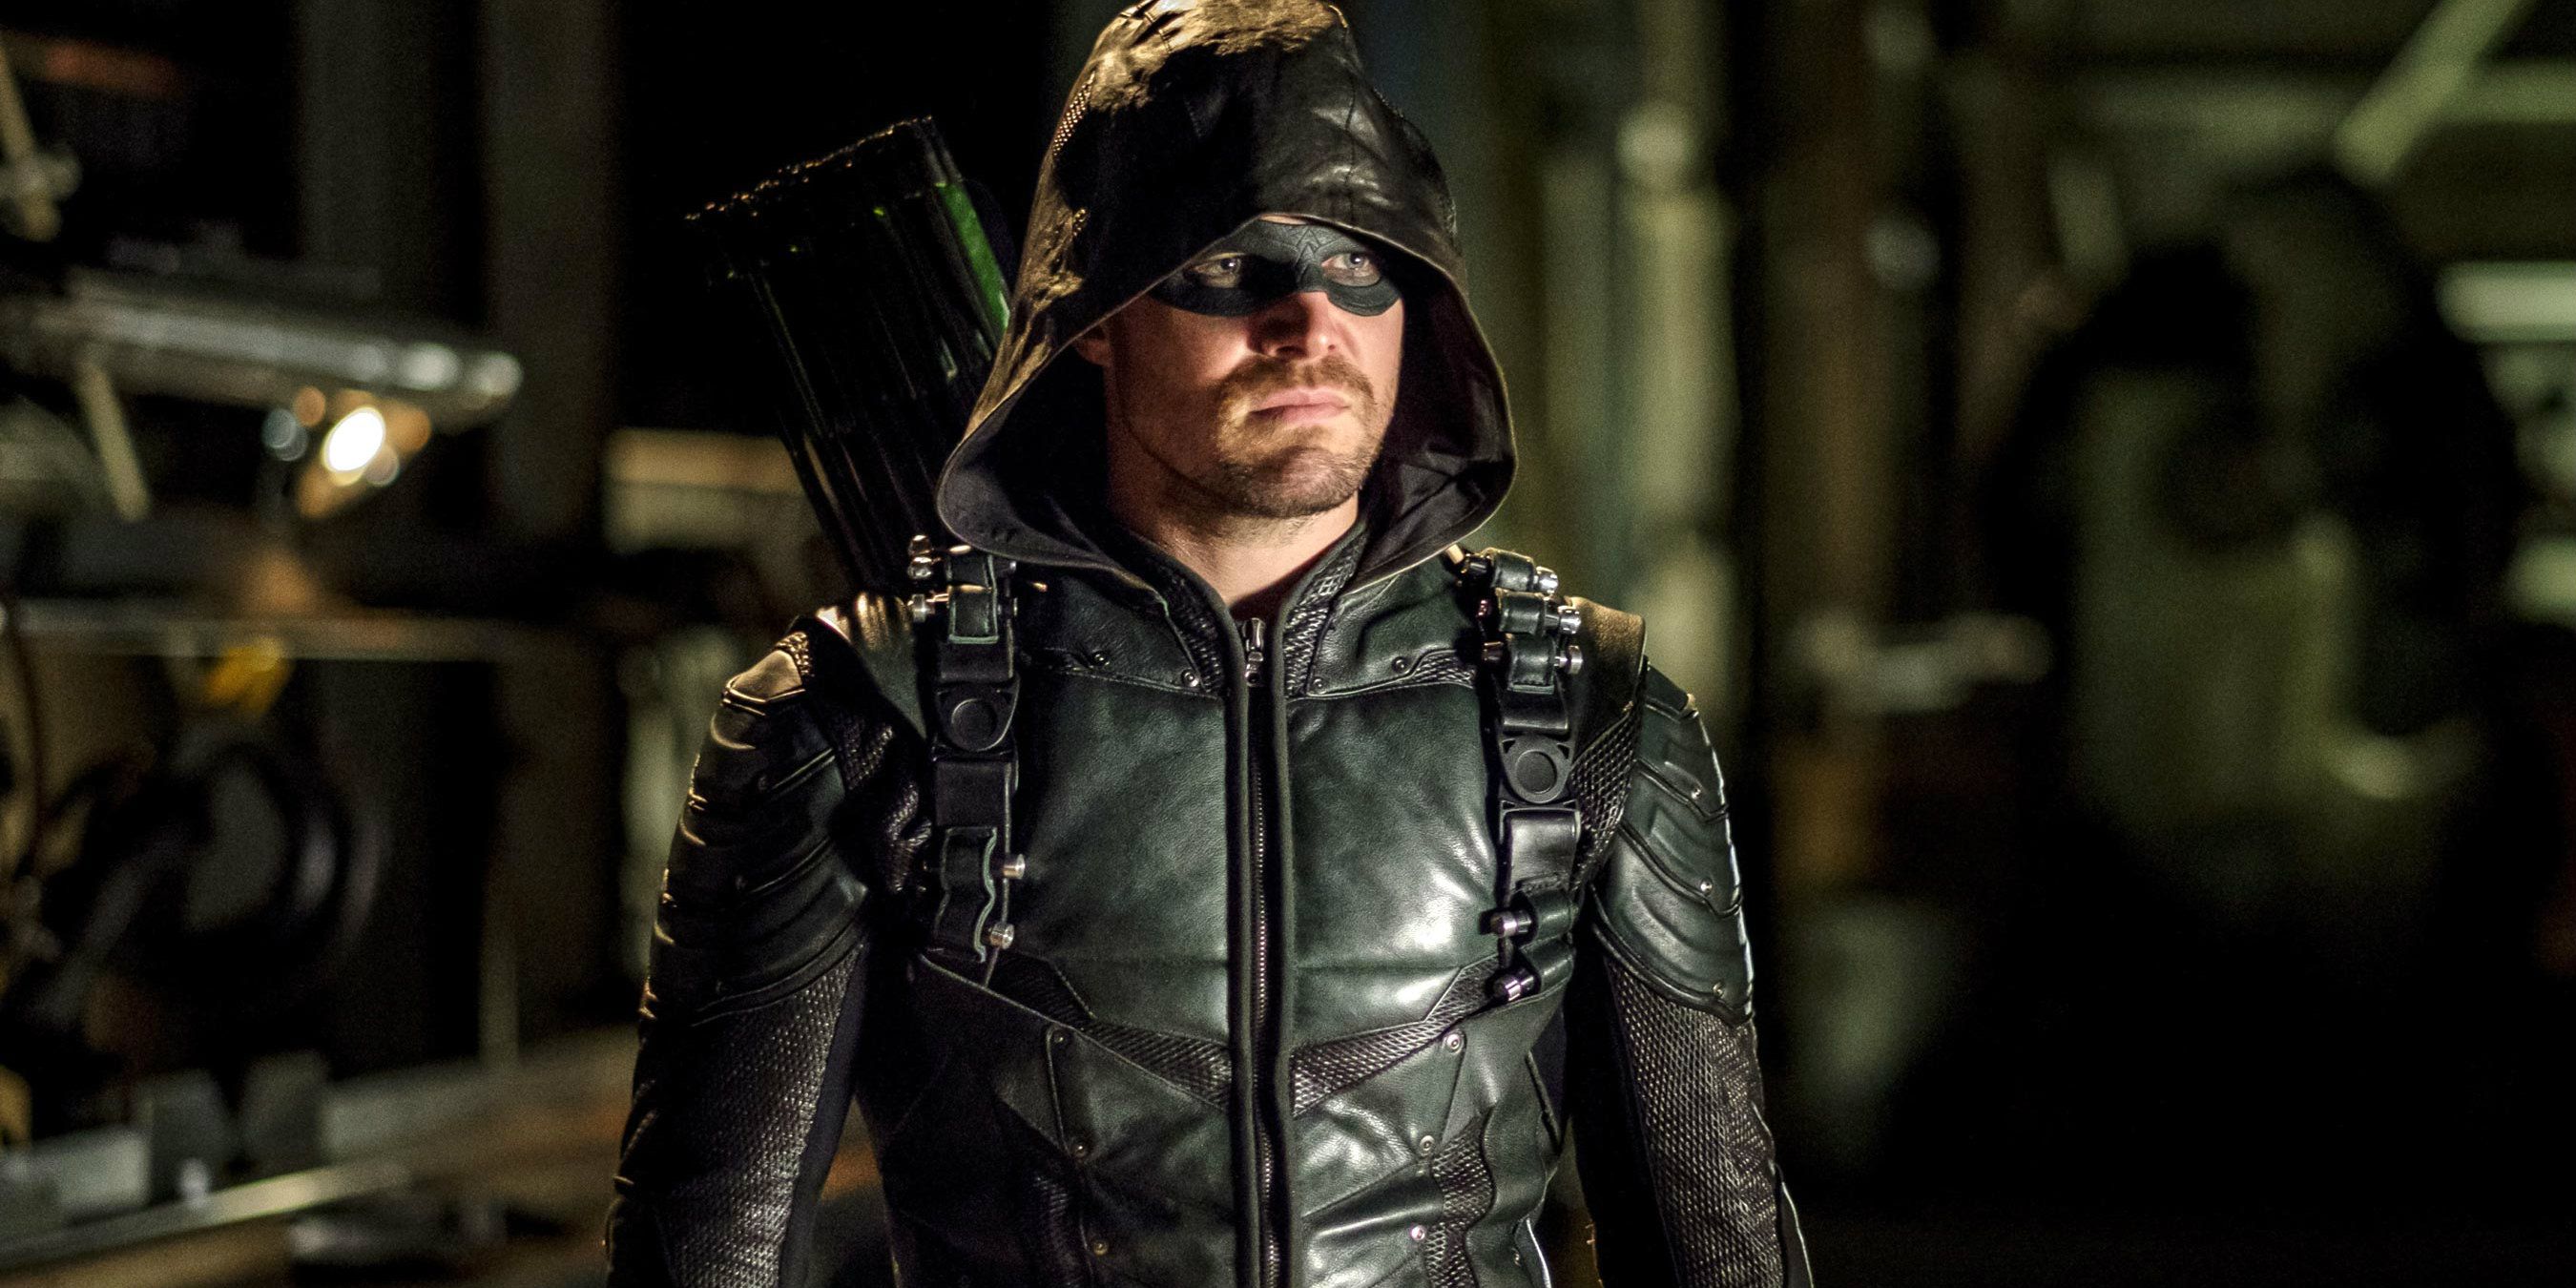 10 Characters We Want To See Return On Arrow Before It Ends